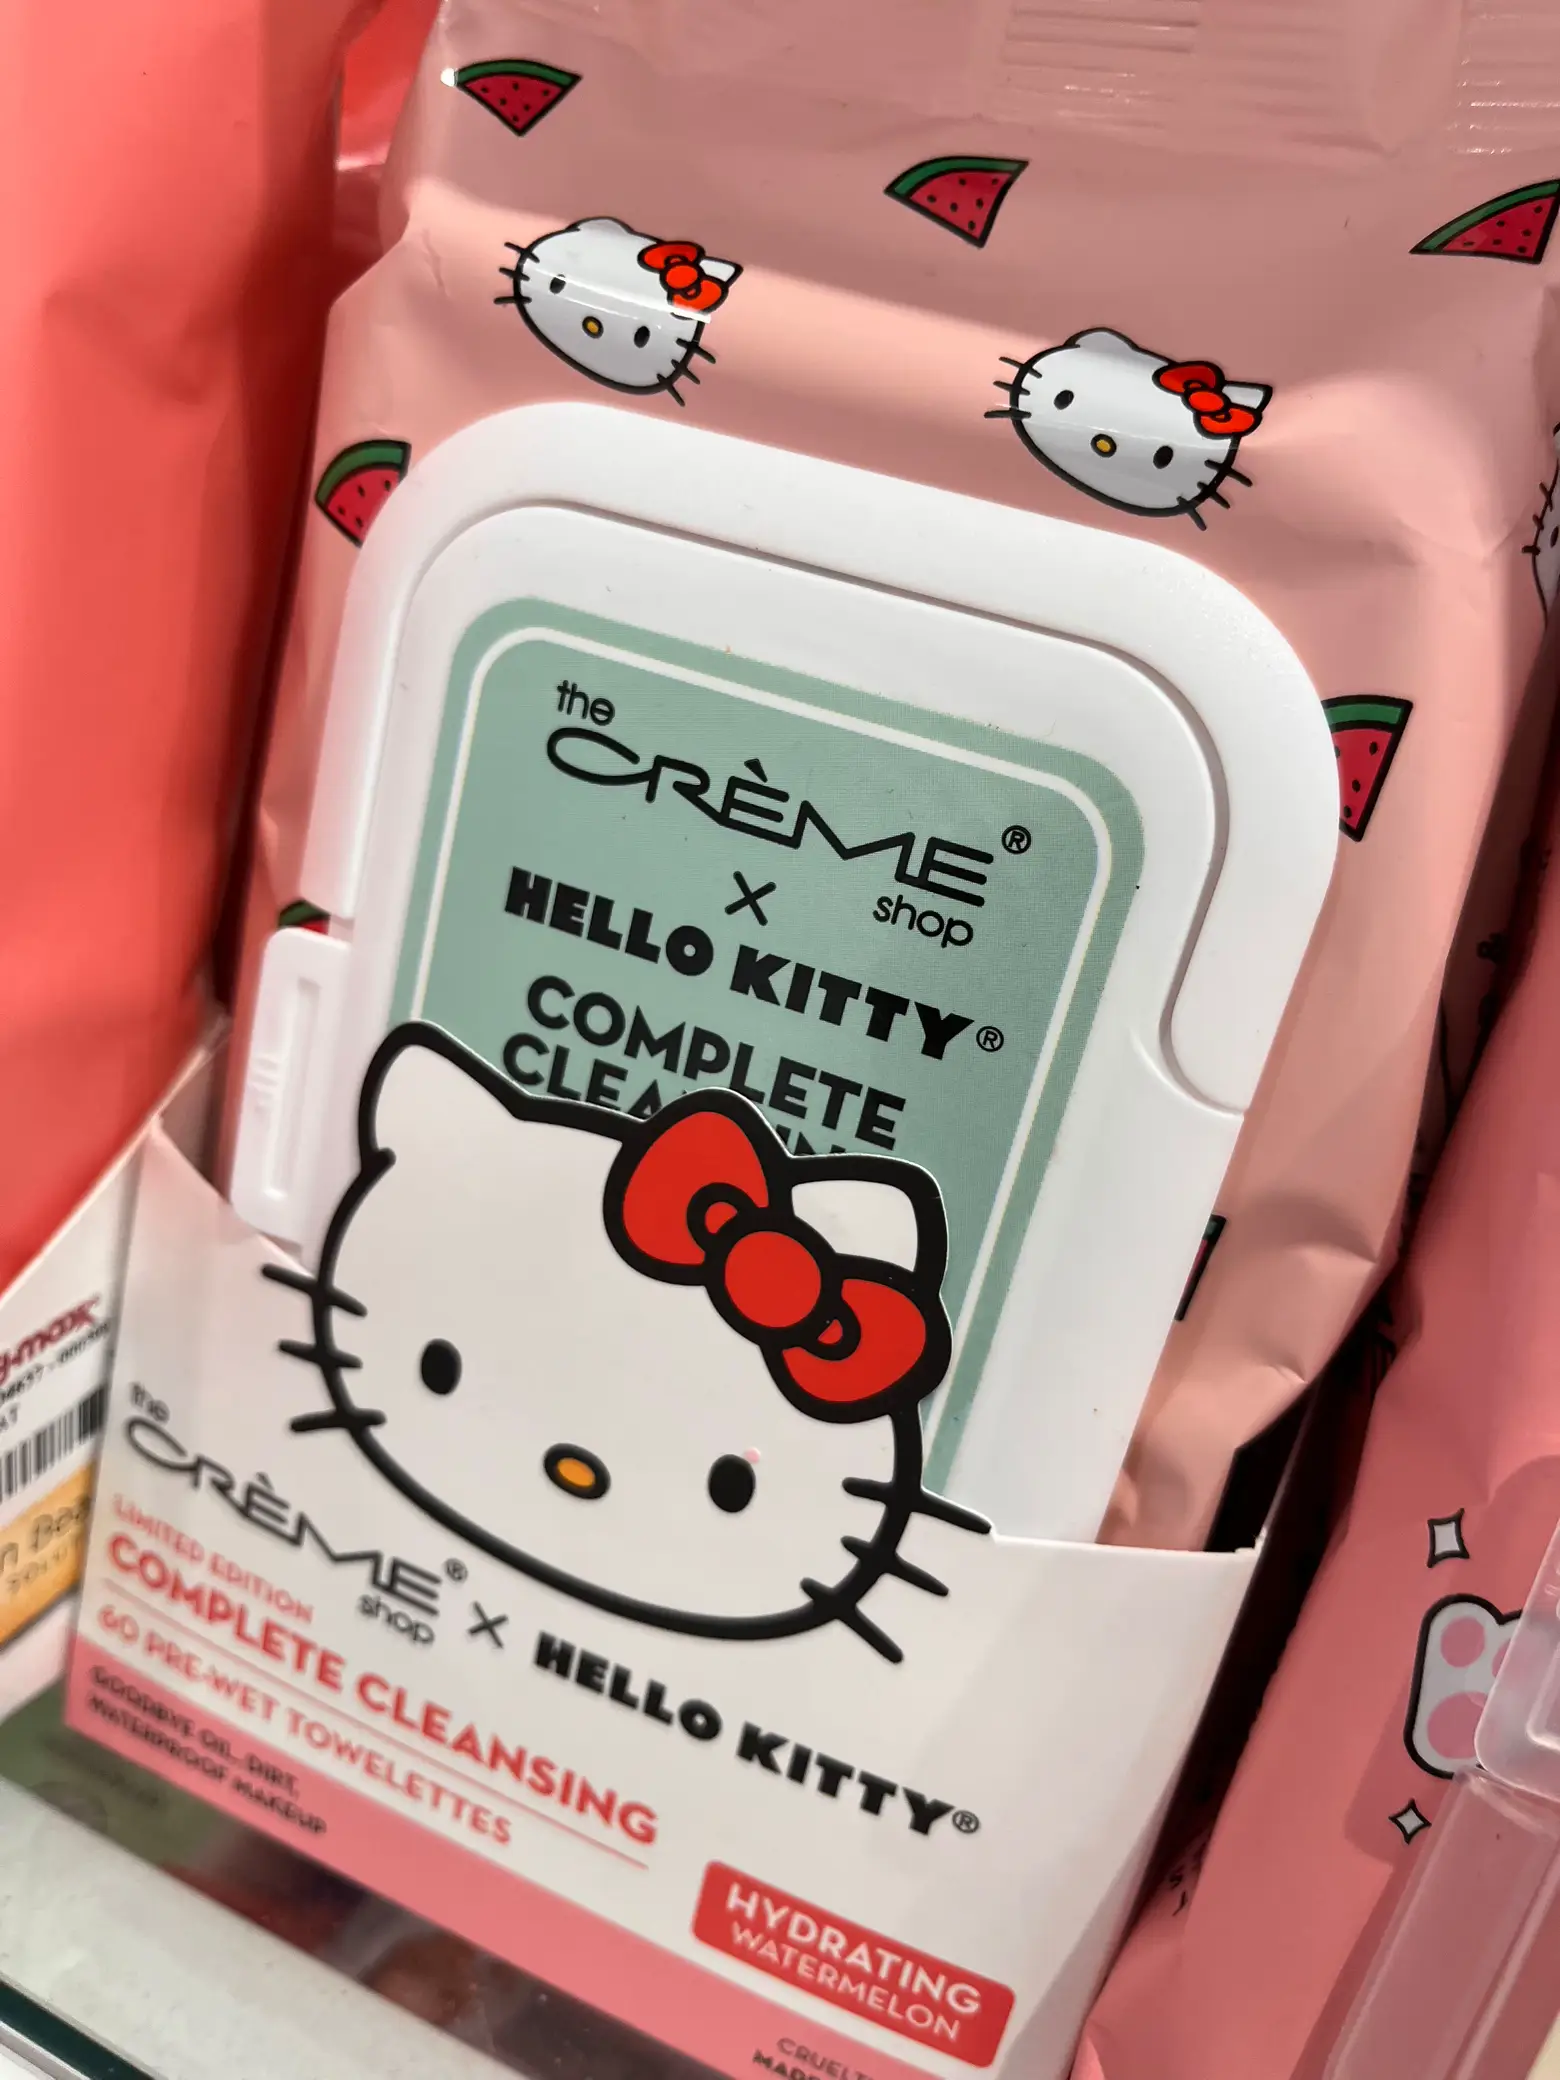 hello kitty jewelry finds that I found yesterday at TJ Maxx. : r/sanrio